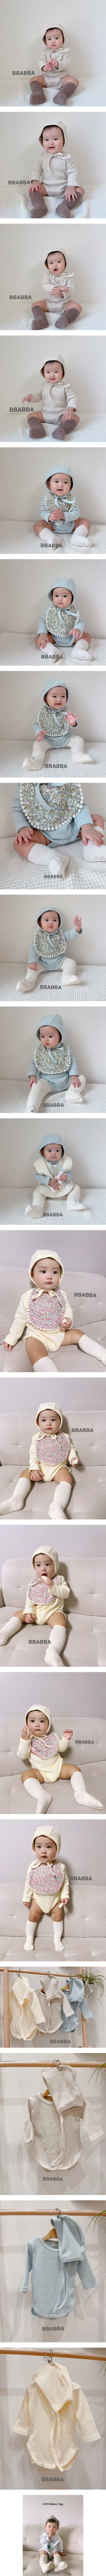 Bbabba - Korean Baby Fashion - #onlinebabyboutique - Butter Waffle Boonet Body Suit - 2